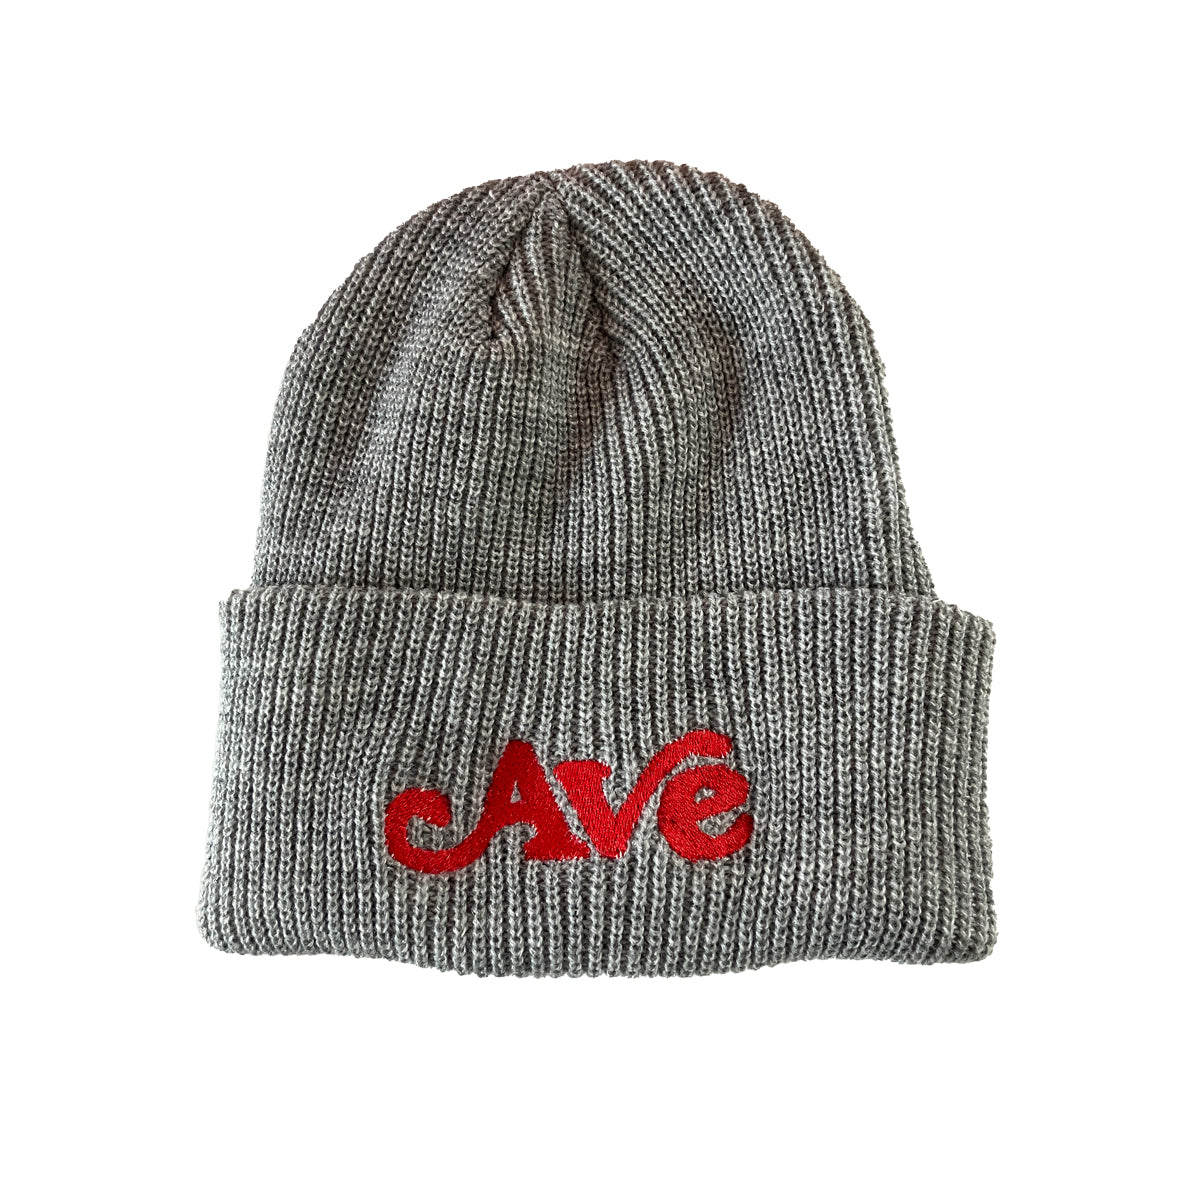 AVE Script Ribbed Cuffed Knit Beanie - Apple Valley Emporium